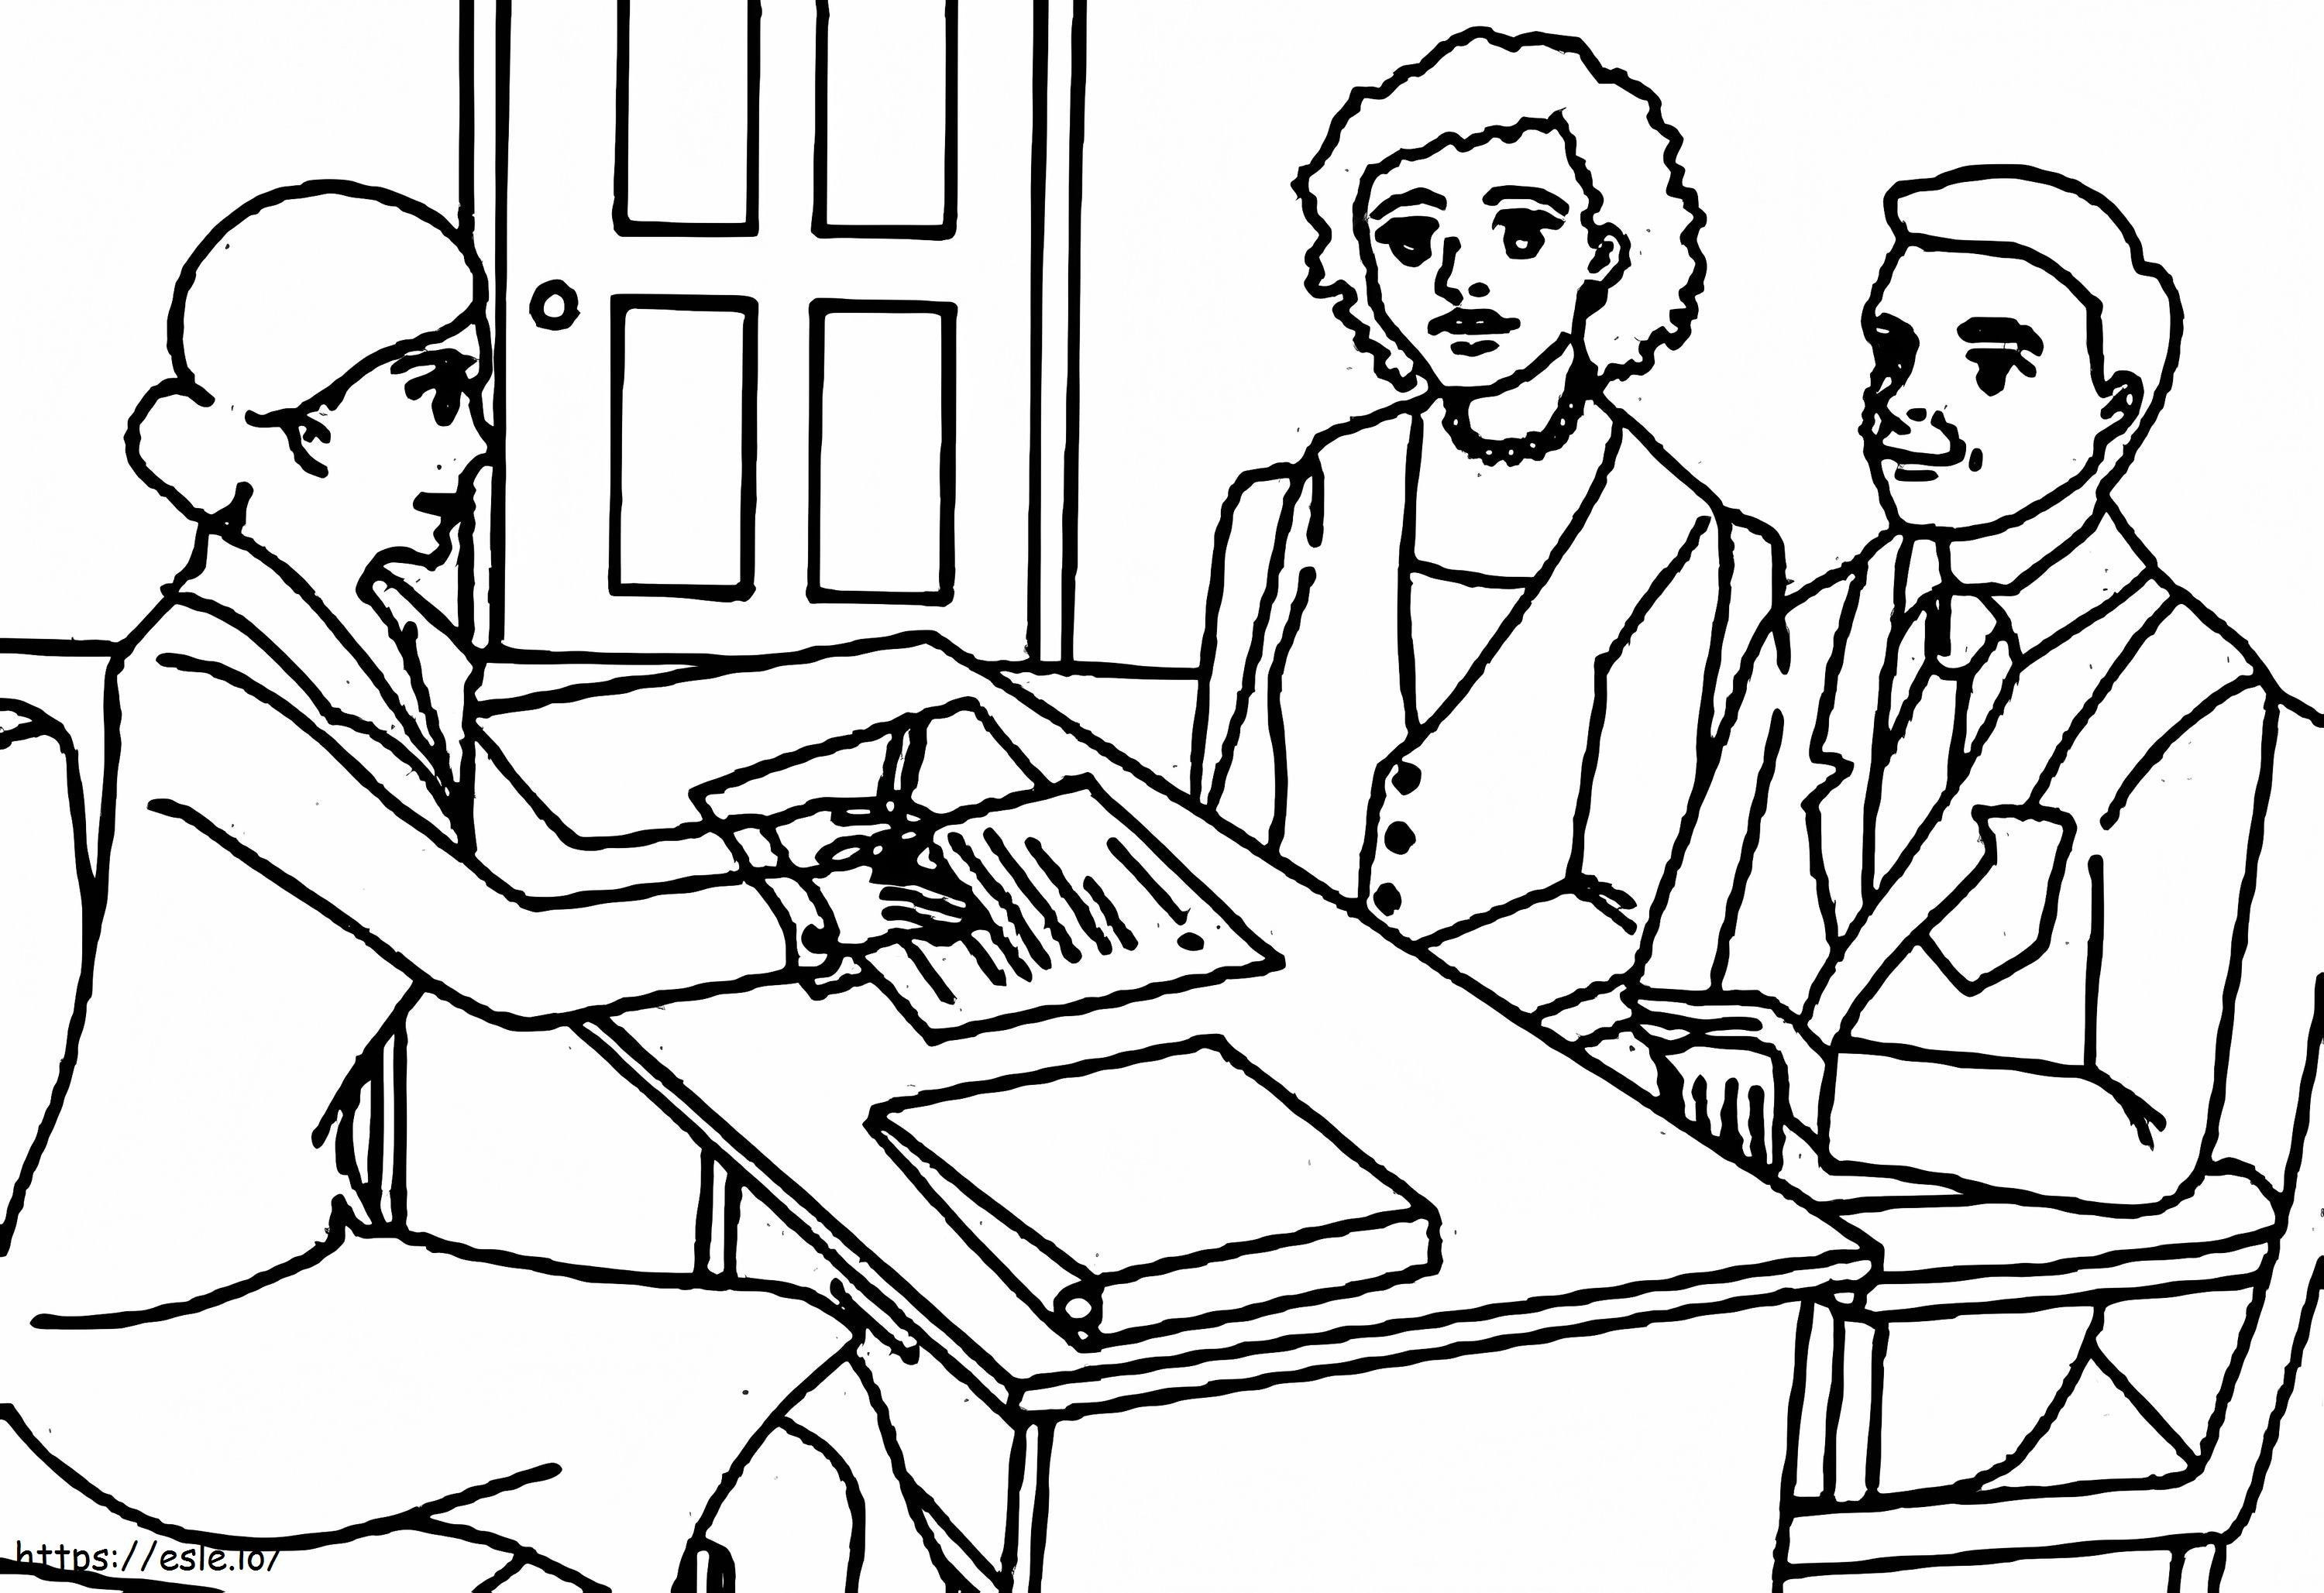 Lawyer 12 coloring page